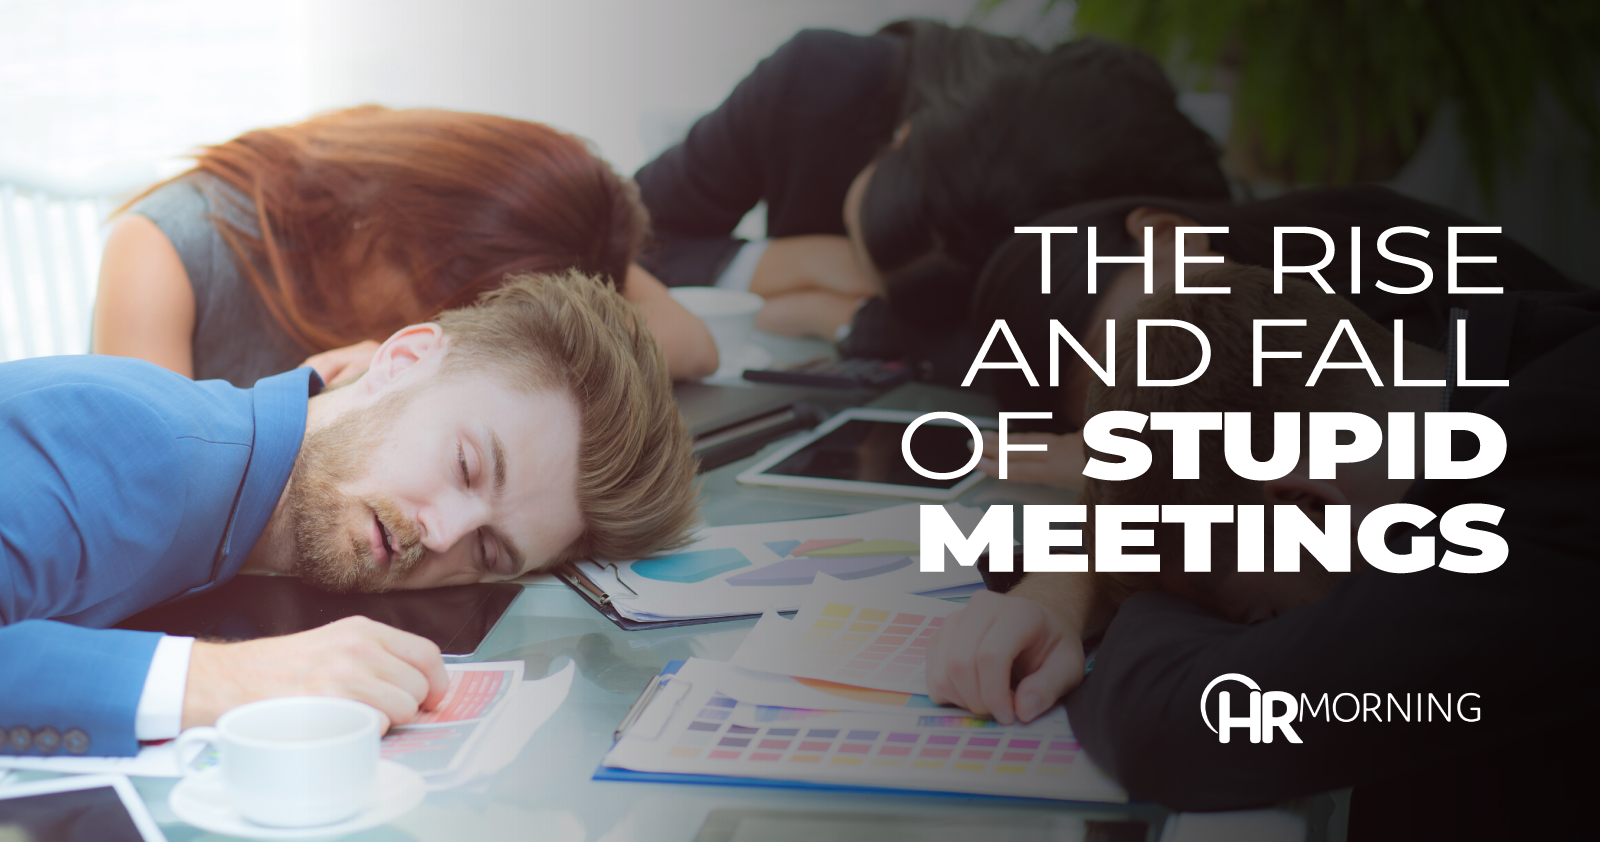 The Rise and Fall of Stupid Meetings